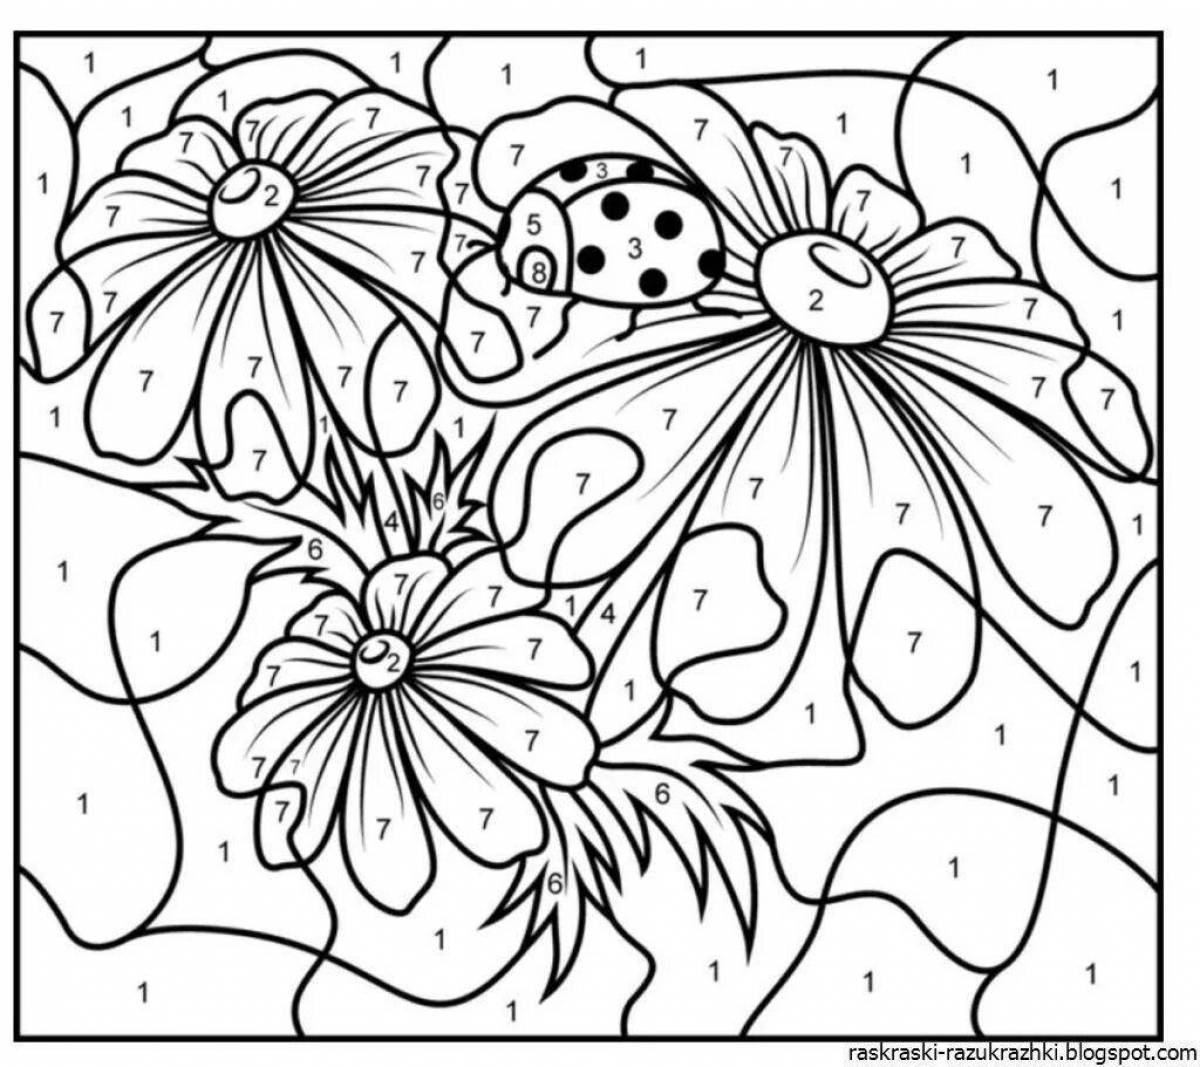 Luxury coloring book